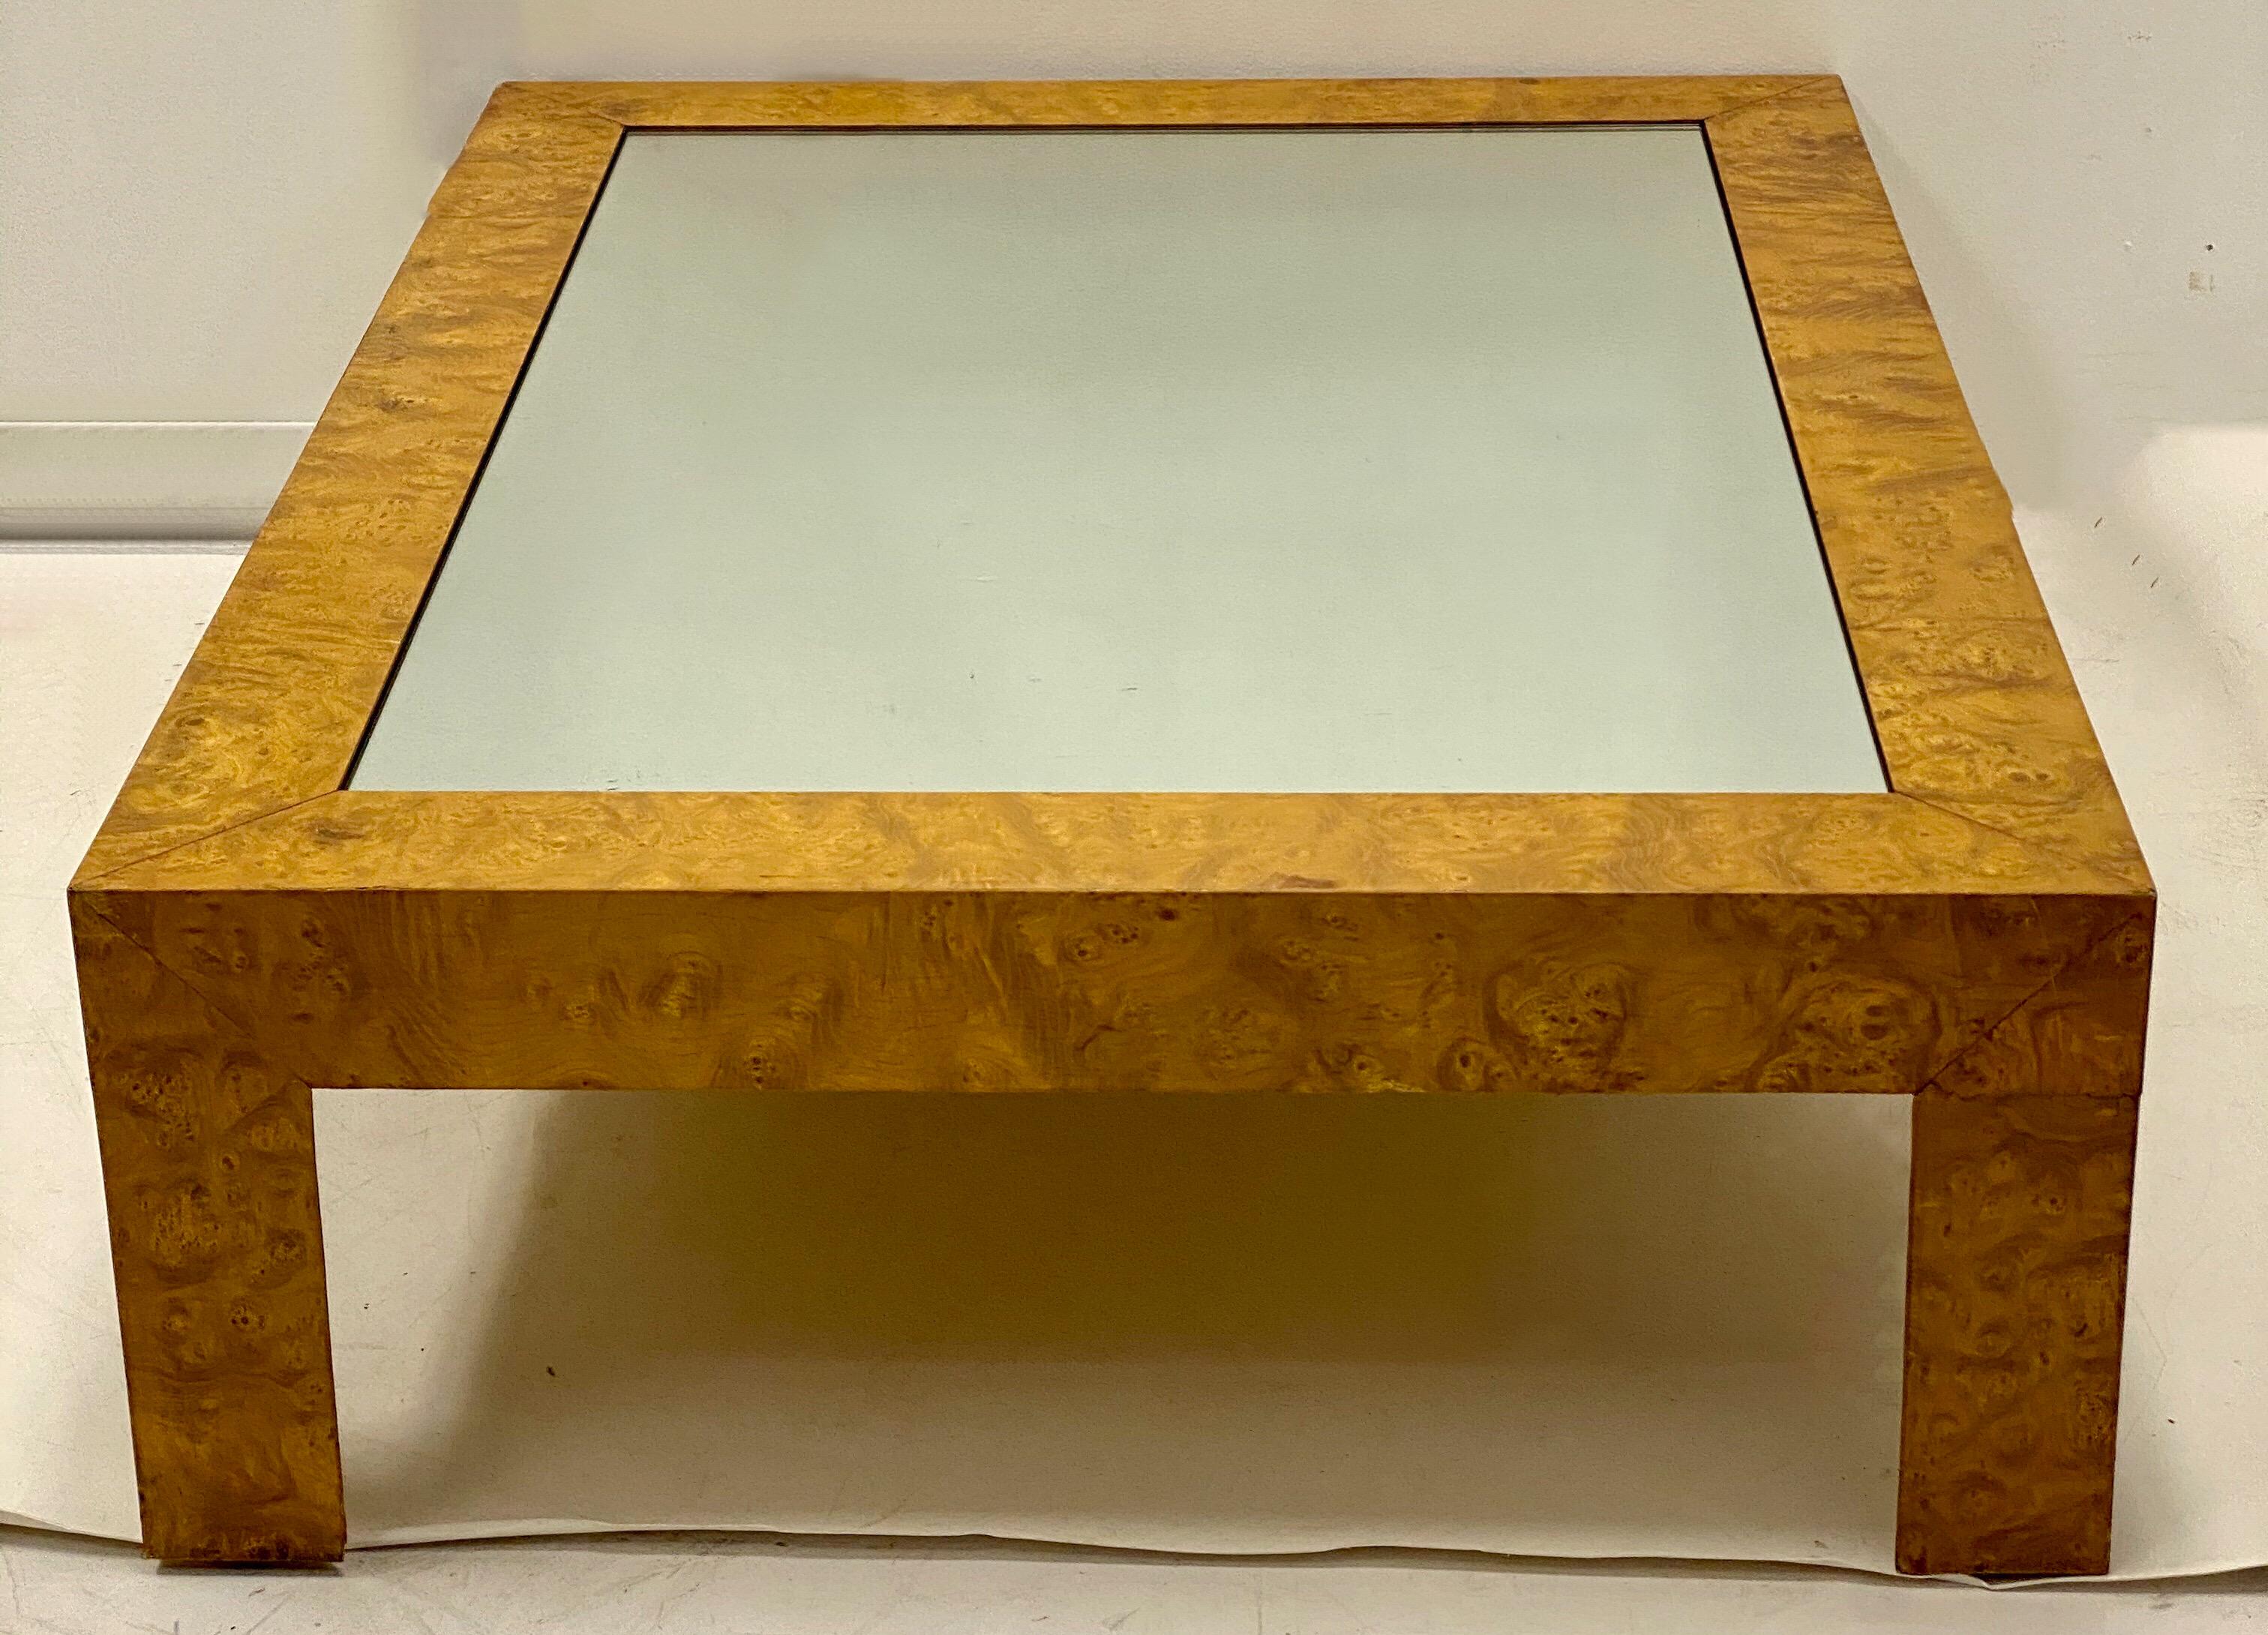 This is a Mid-Century Modern burlwood coffee table with mirror glass insert. It is done in the manner of Milo Baughman. It most likely dates to the 70s and is in very good condition.